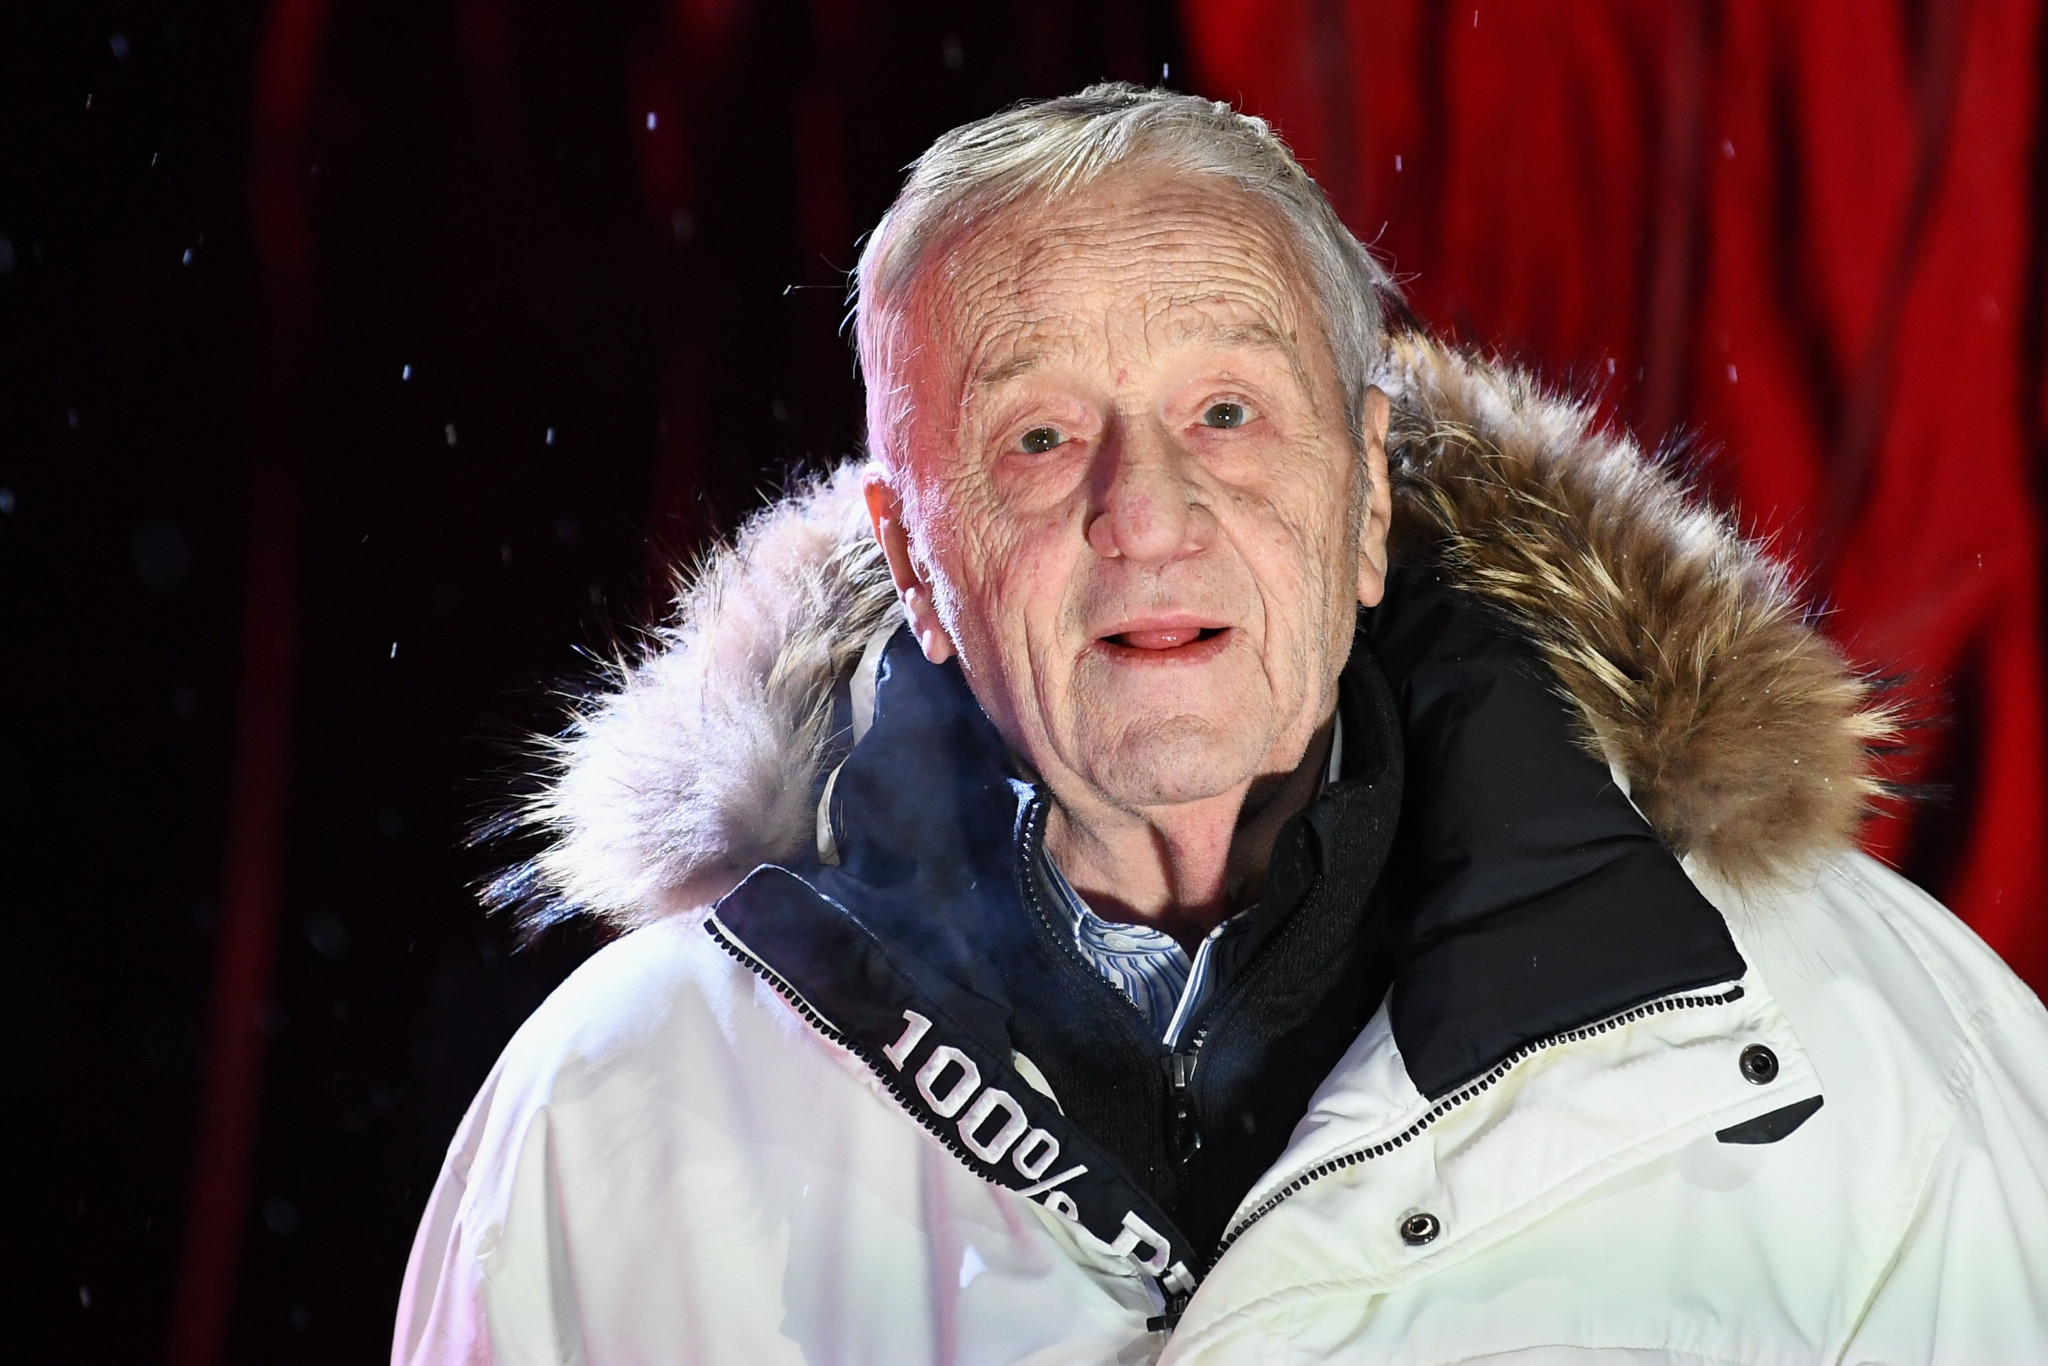 Protect our Winters is urging FIS President Gian-Franco Kasper to step aside after he spoke of 